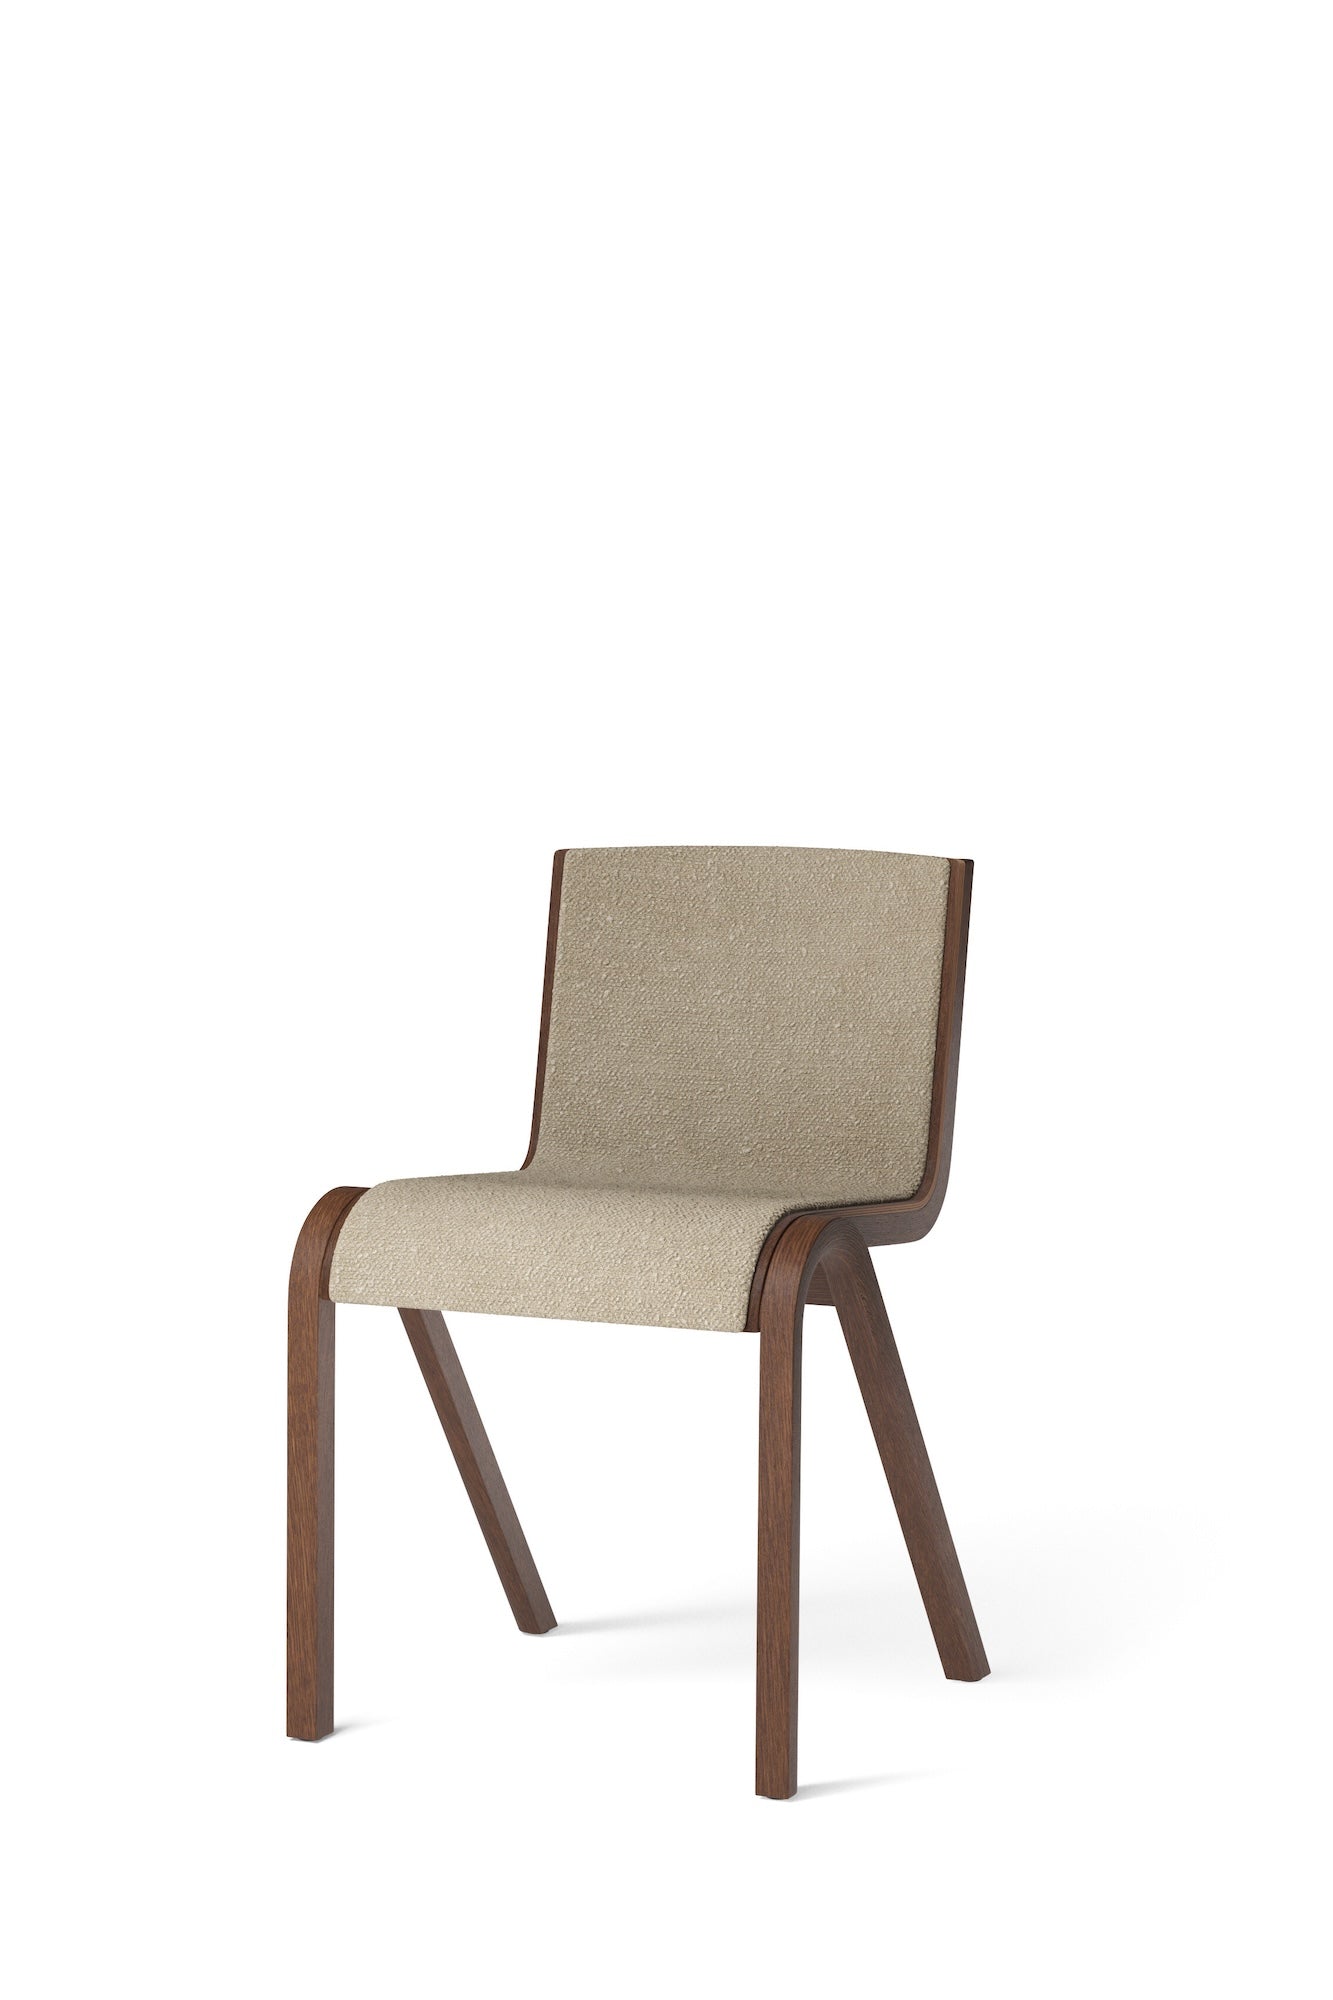  The Ready Dining Chair Front Upholstered in Red Stained Oak & Audo Bouclé 02 by Audo Copenhagen